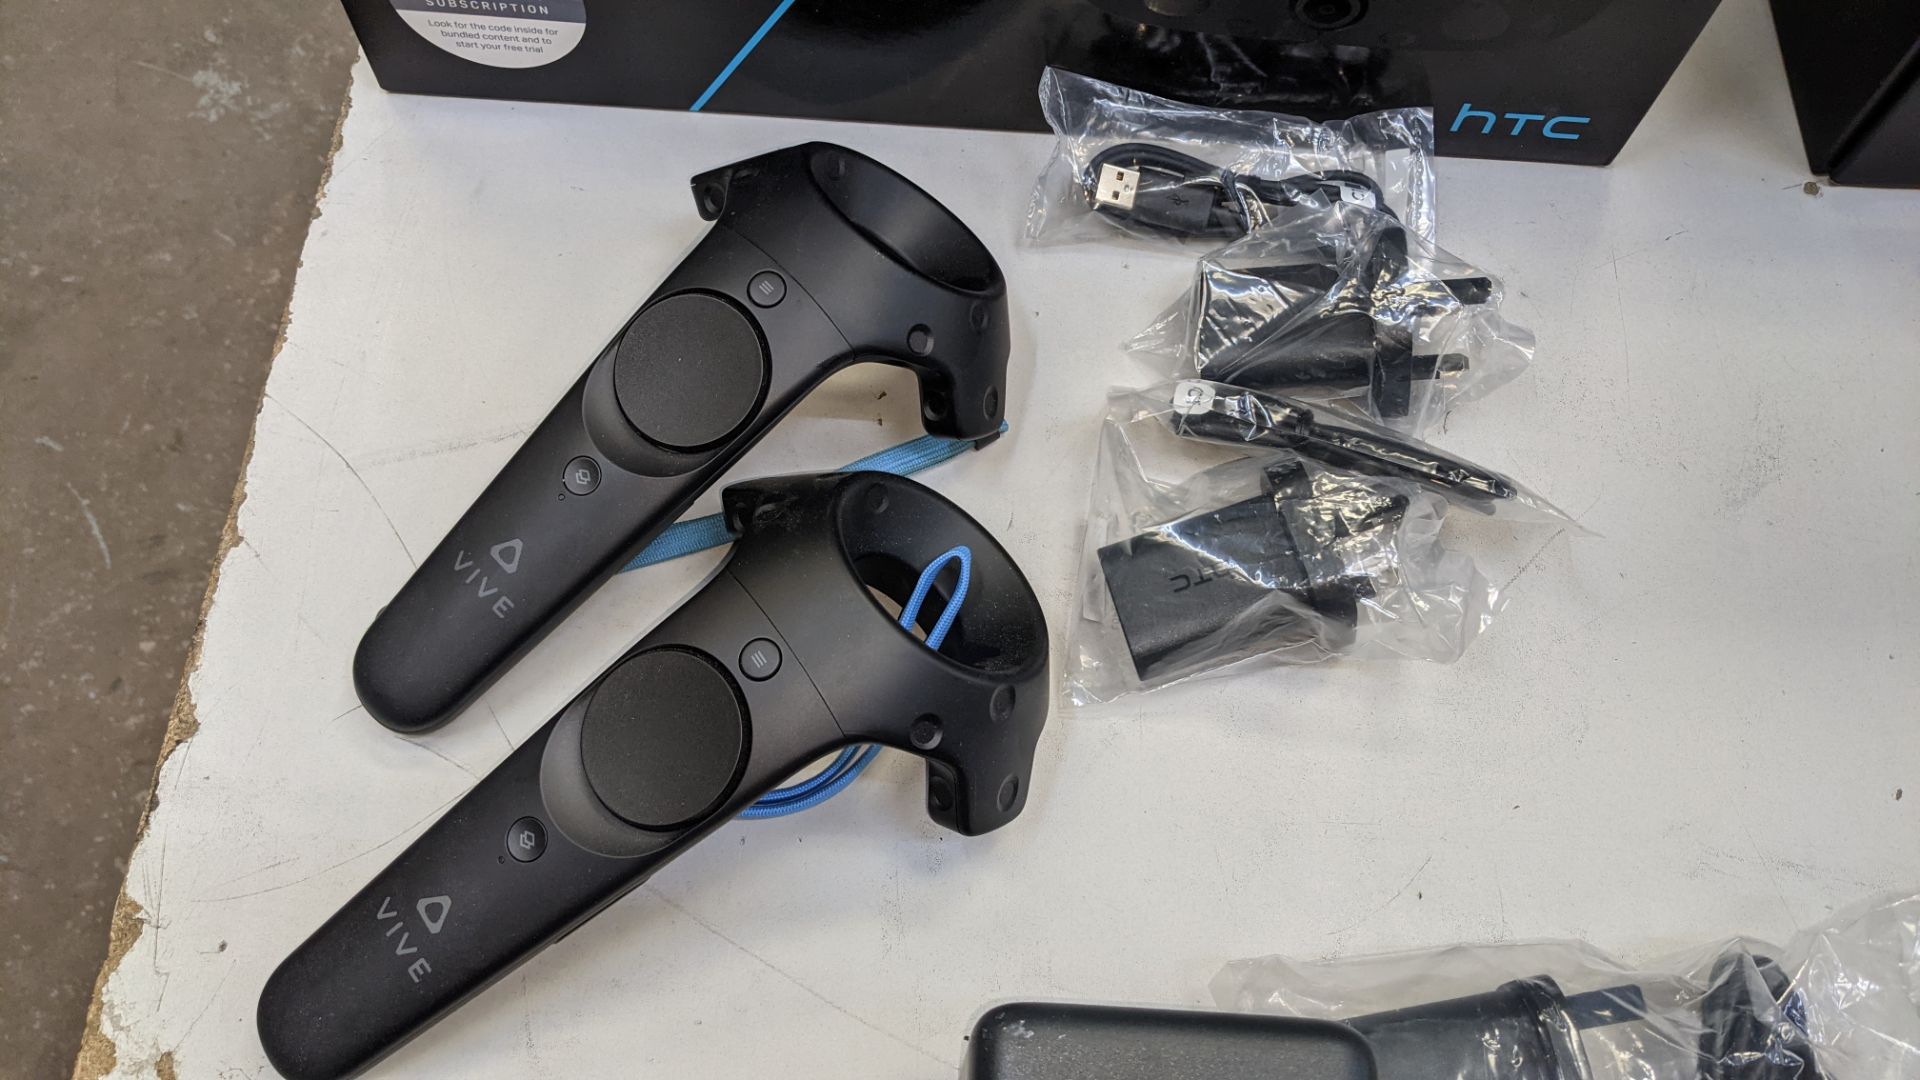 HTC Vive virtual reality kit comprising headset, controllers, base stations & more as pictured - Image 8 of 15